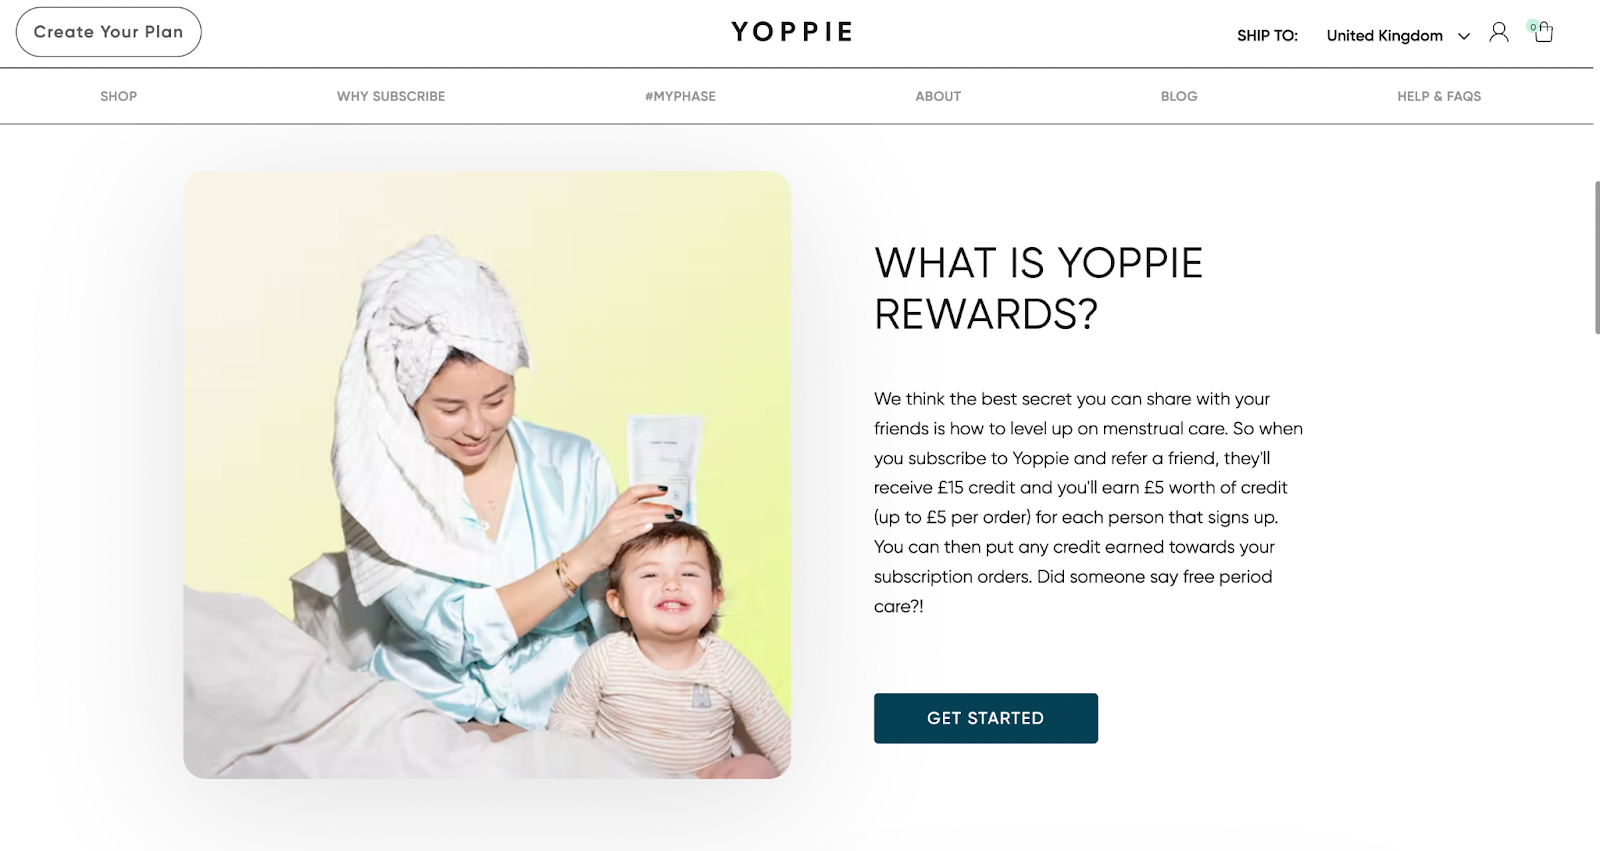 Referral marketing example 3 by Yoppie